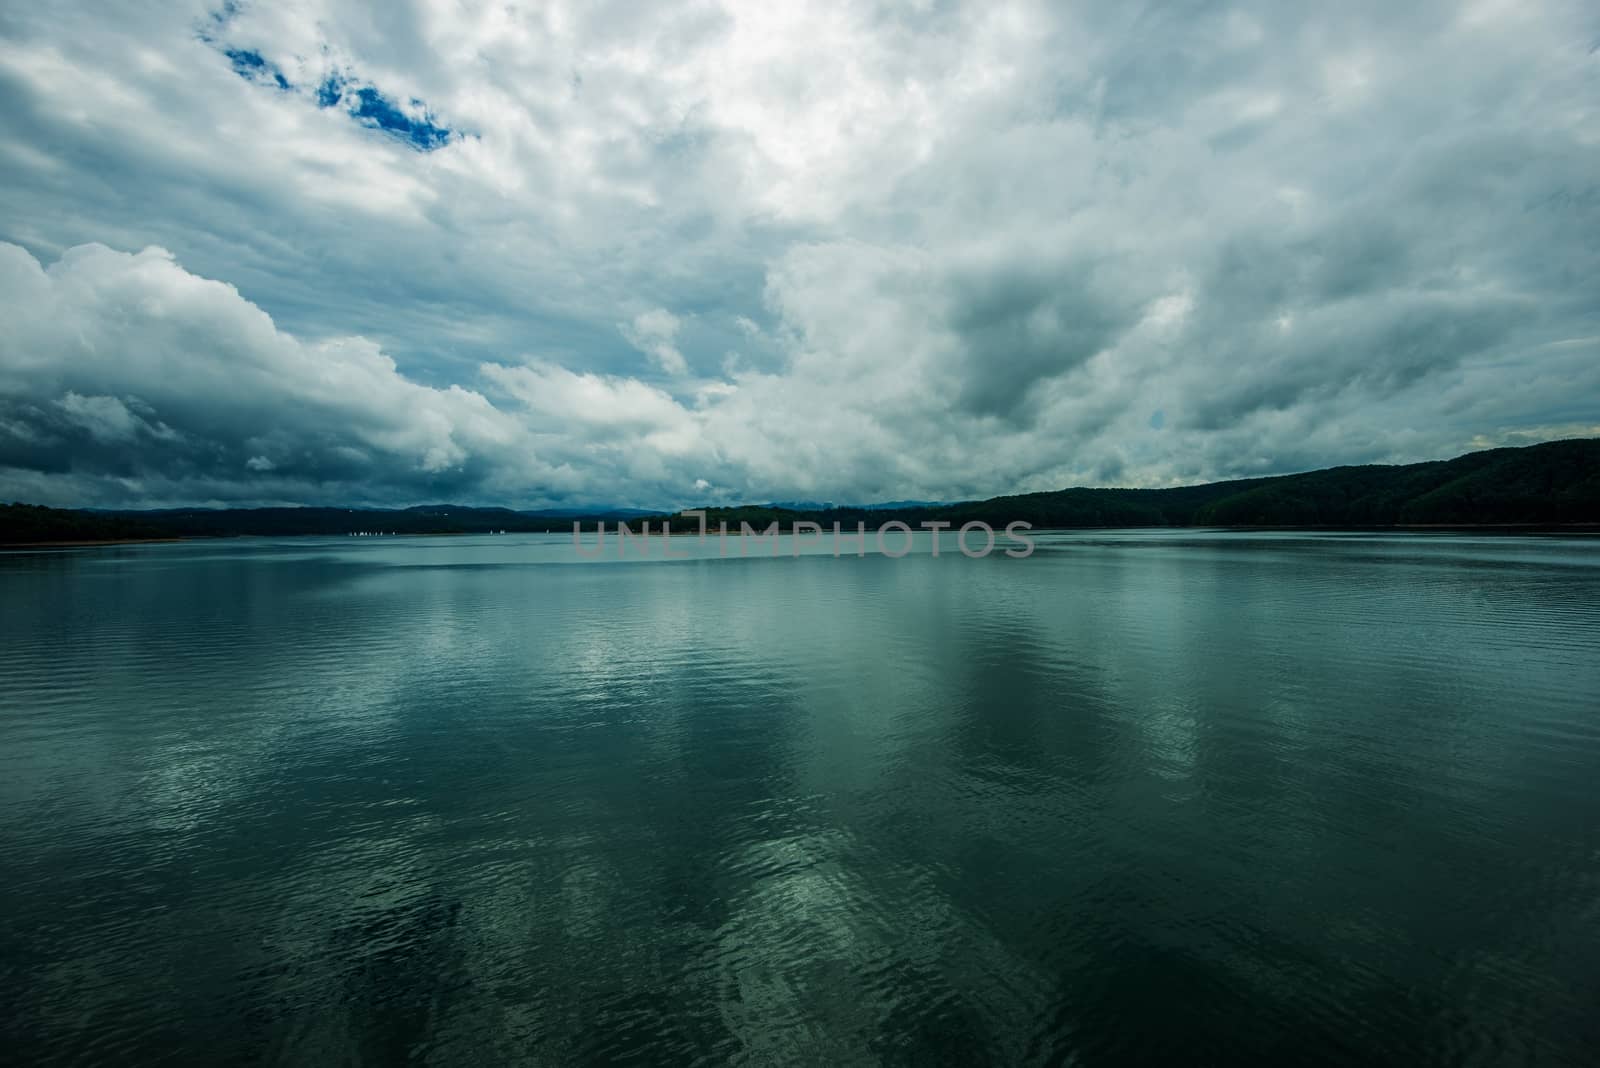 Stormy Lake Scenery. The Solinskie Lake in Poland, Europe. Solina. Stormy Weather in Bieszczady.